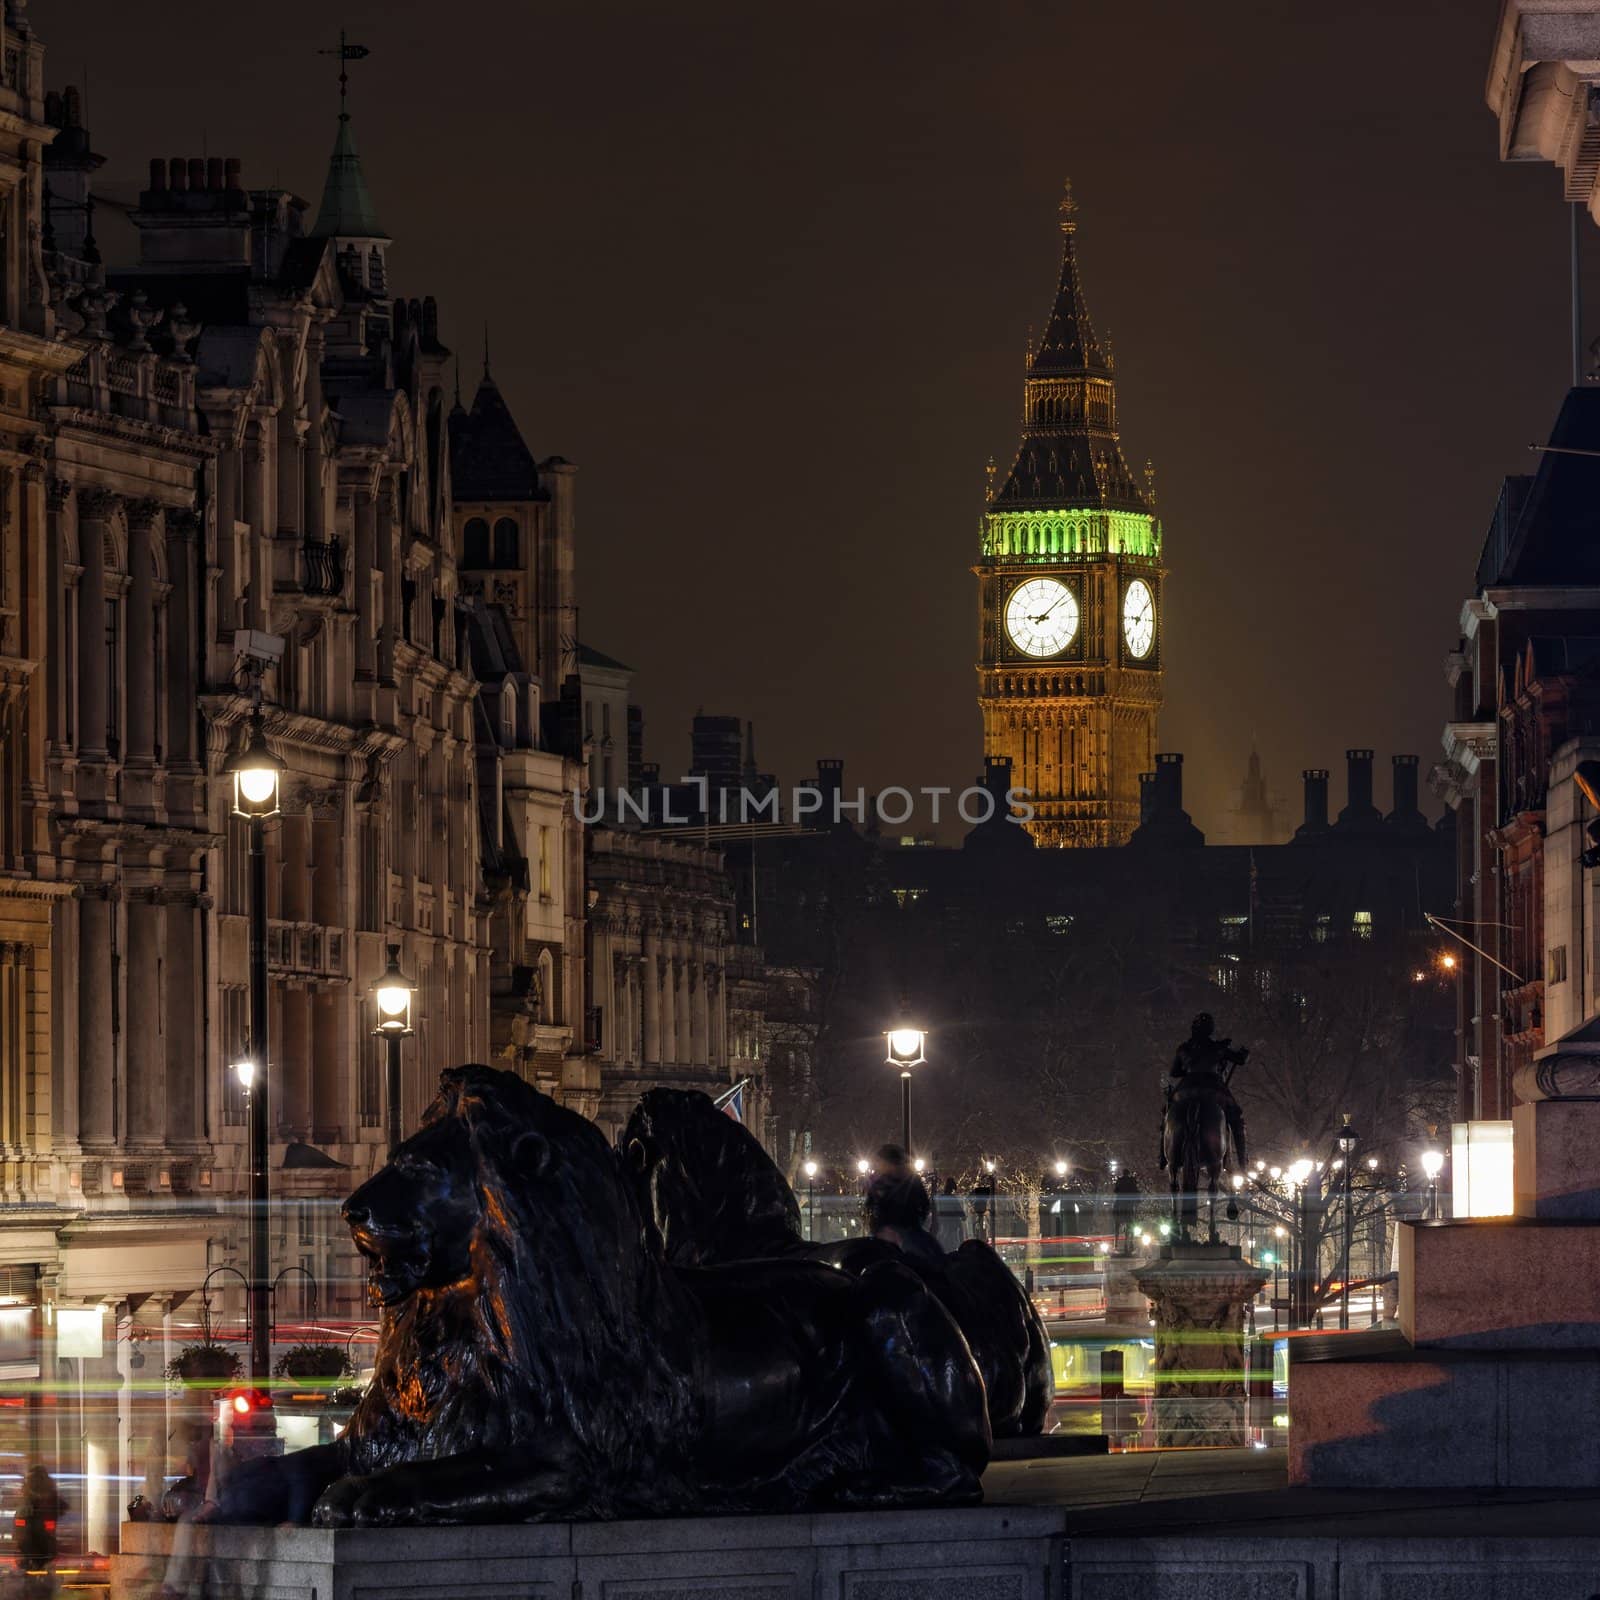 Elizabeth Tower also known as the Clock Tower seen from Trafalgar Square at night, London, England, UK